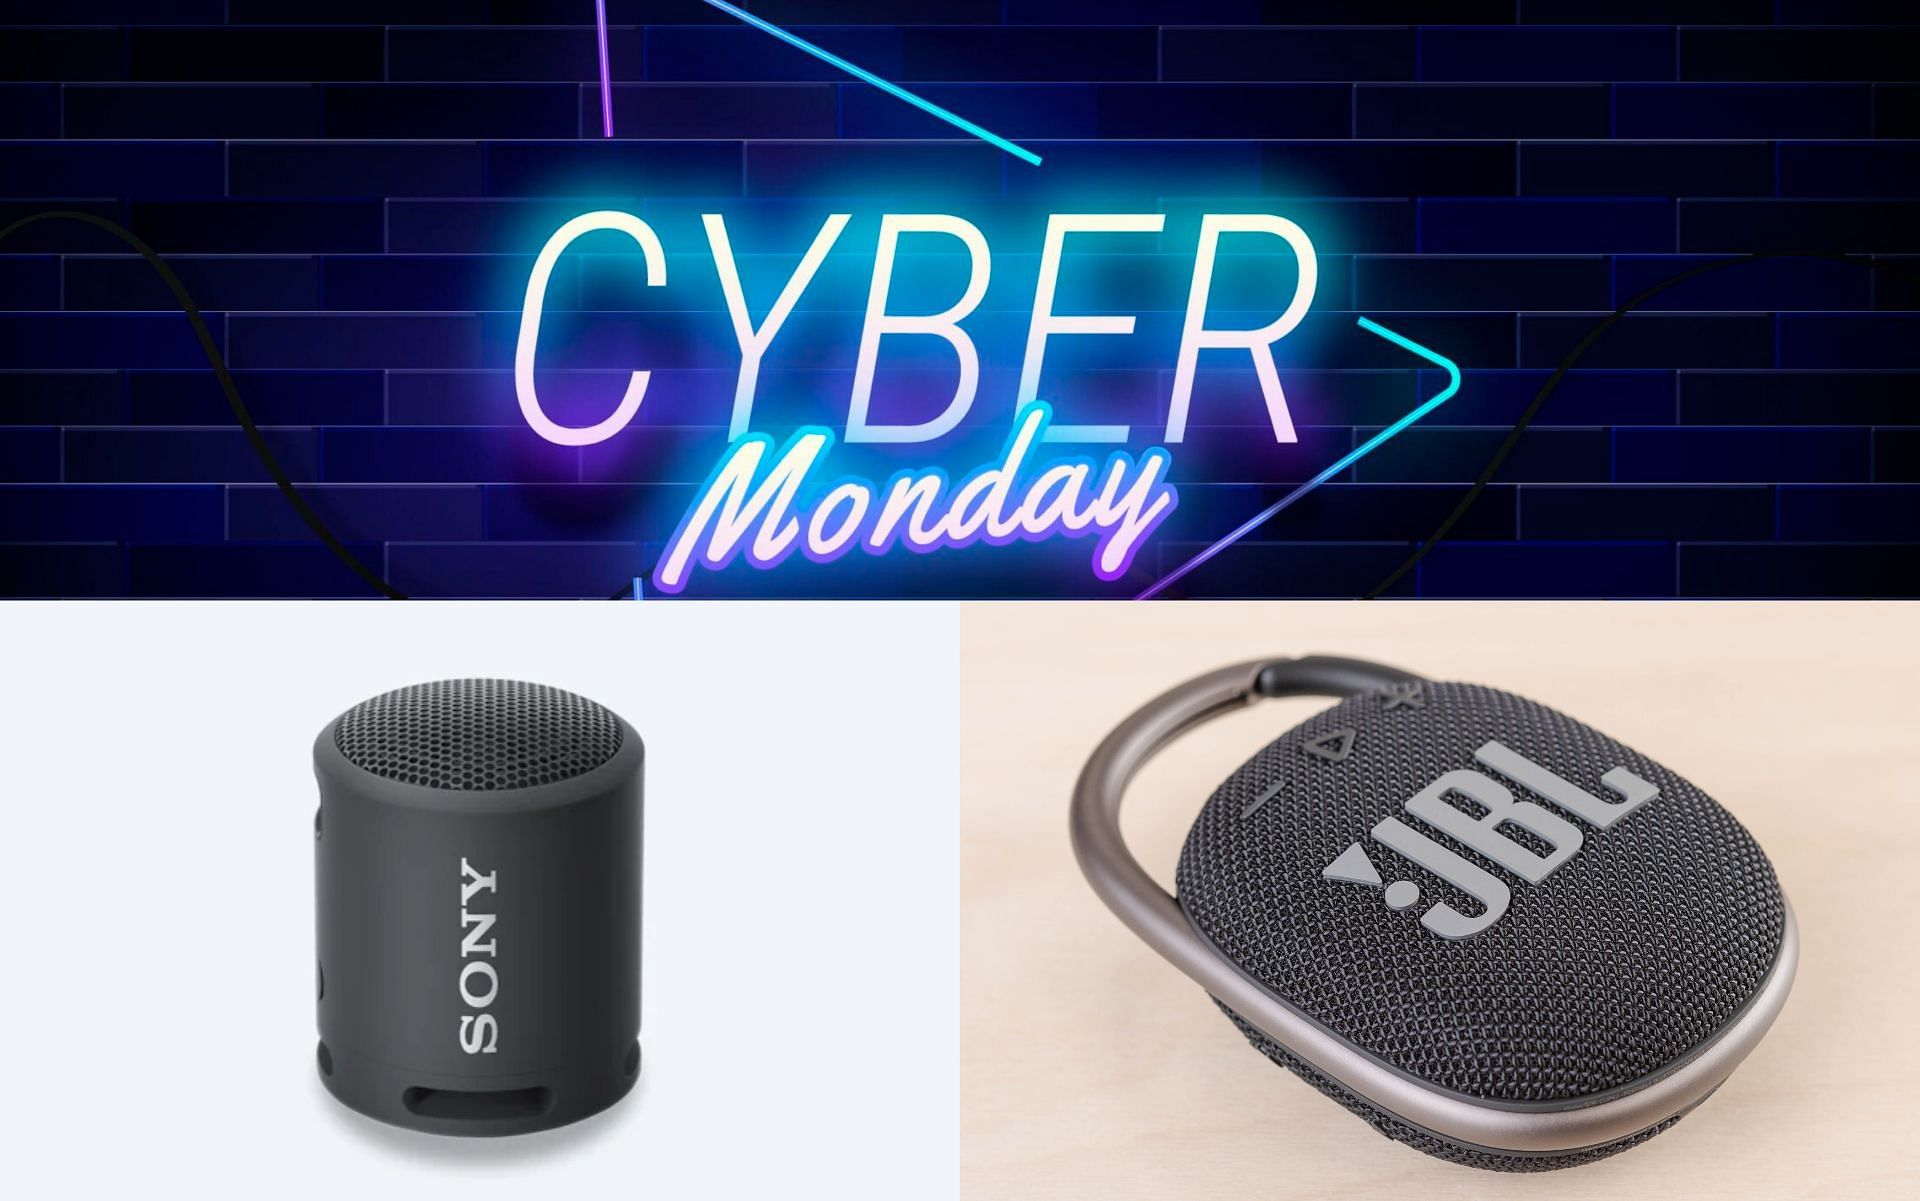 Cyber Monday Bluetooth Speaker deals  (image by Sony and JBL)